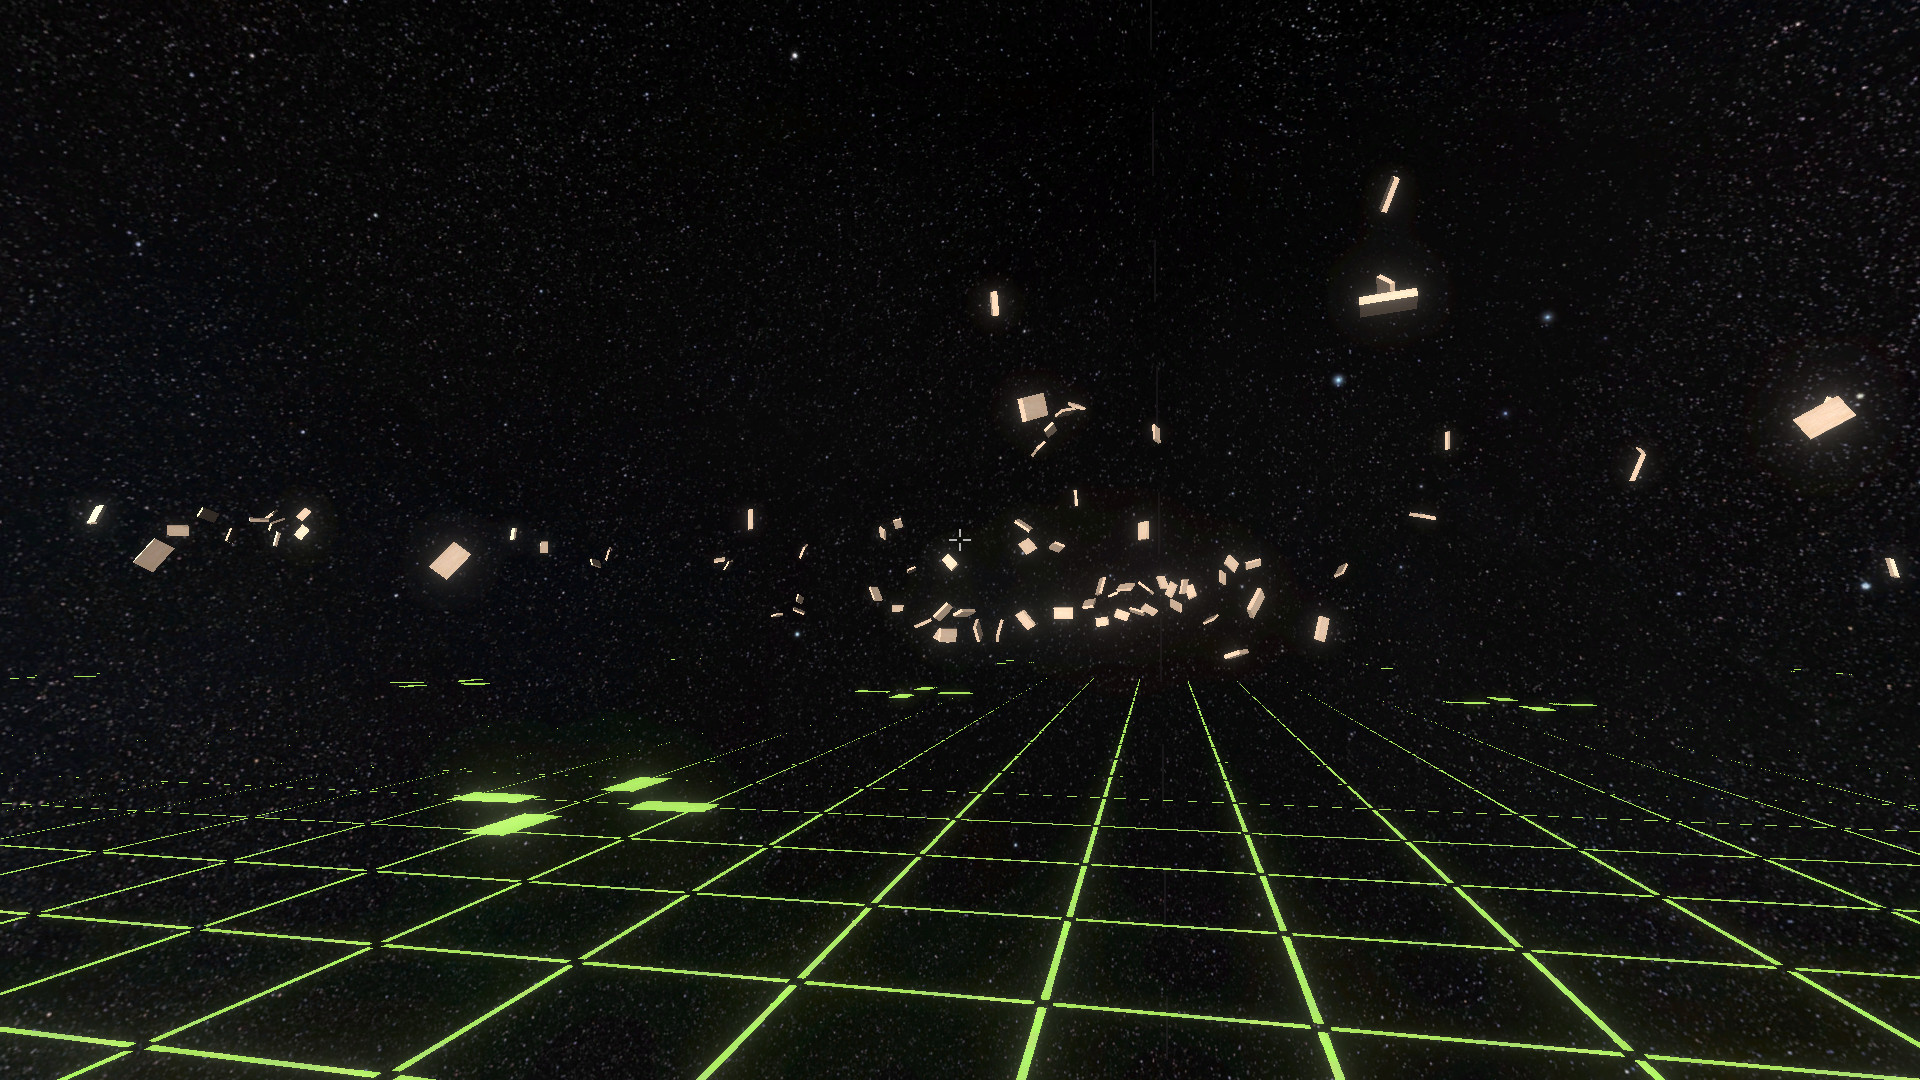 Spacetime Dimension Free Download